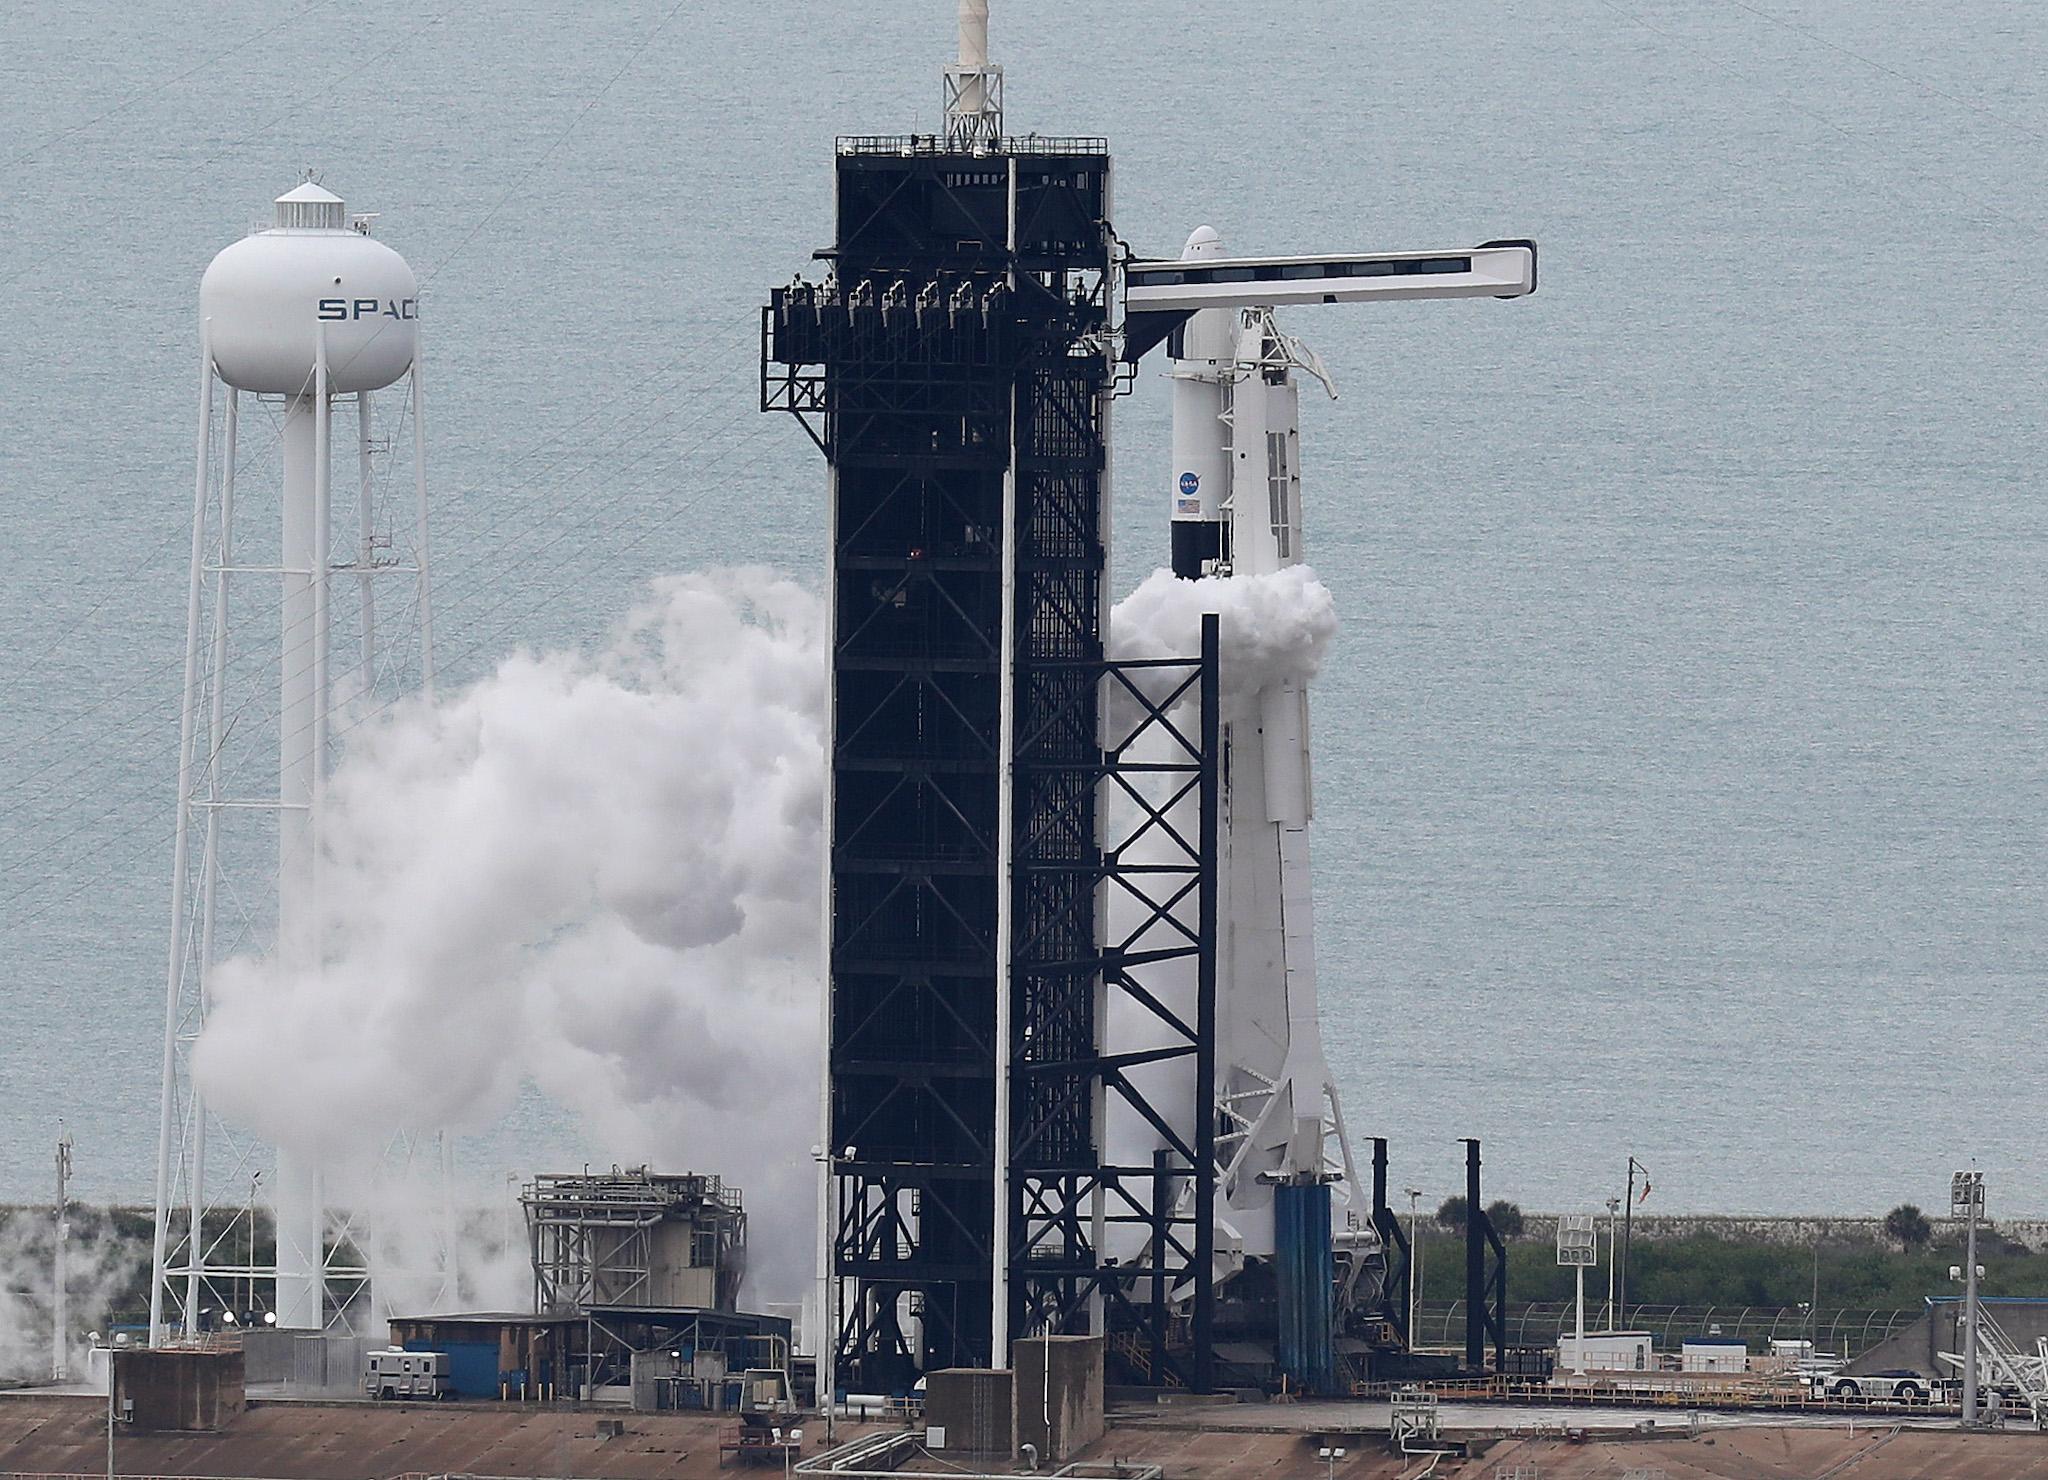 SpaceX launch cancelled minutes before lift-off due to bad weather